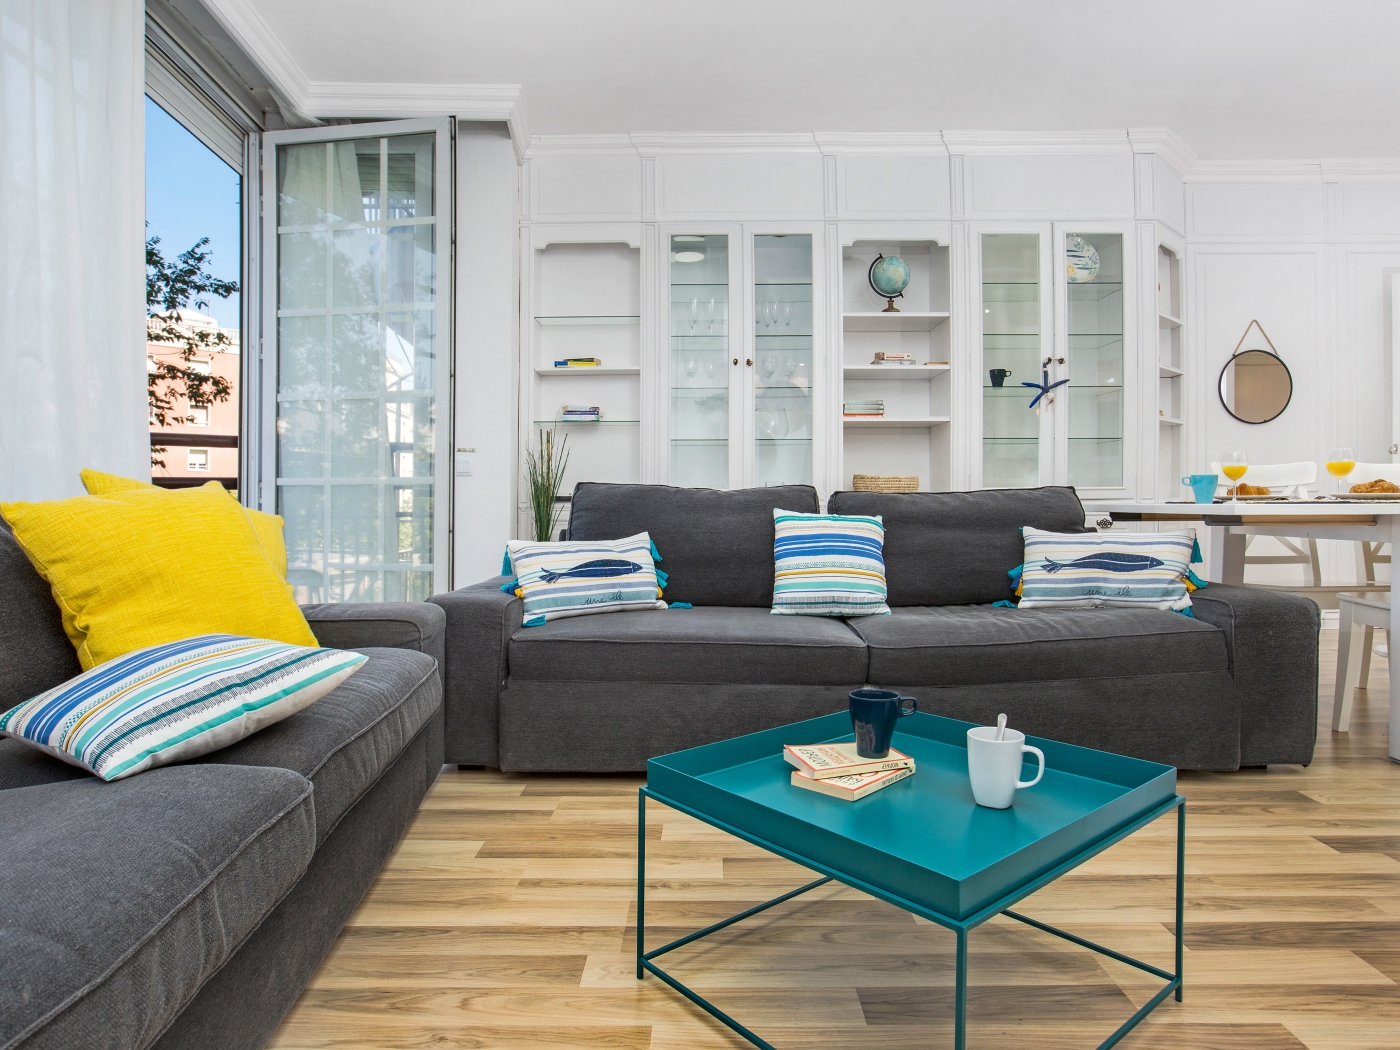 Exclusive and spacious apartment in the center of Barcelona for monthly rentals - My Space Barcelona Apartments